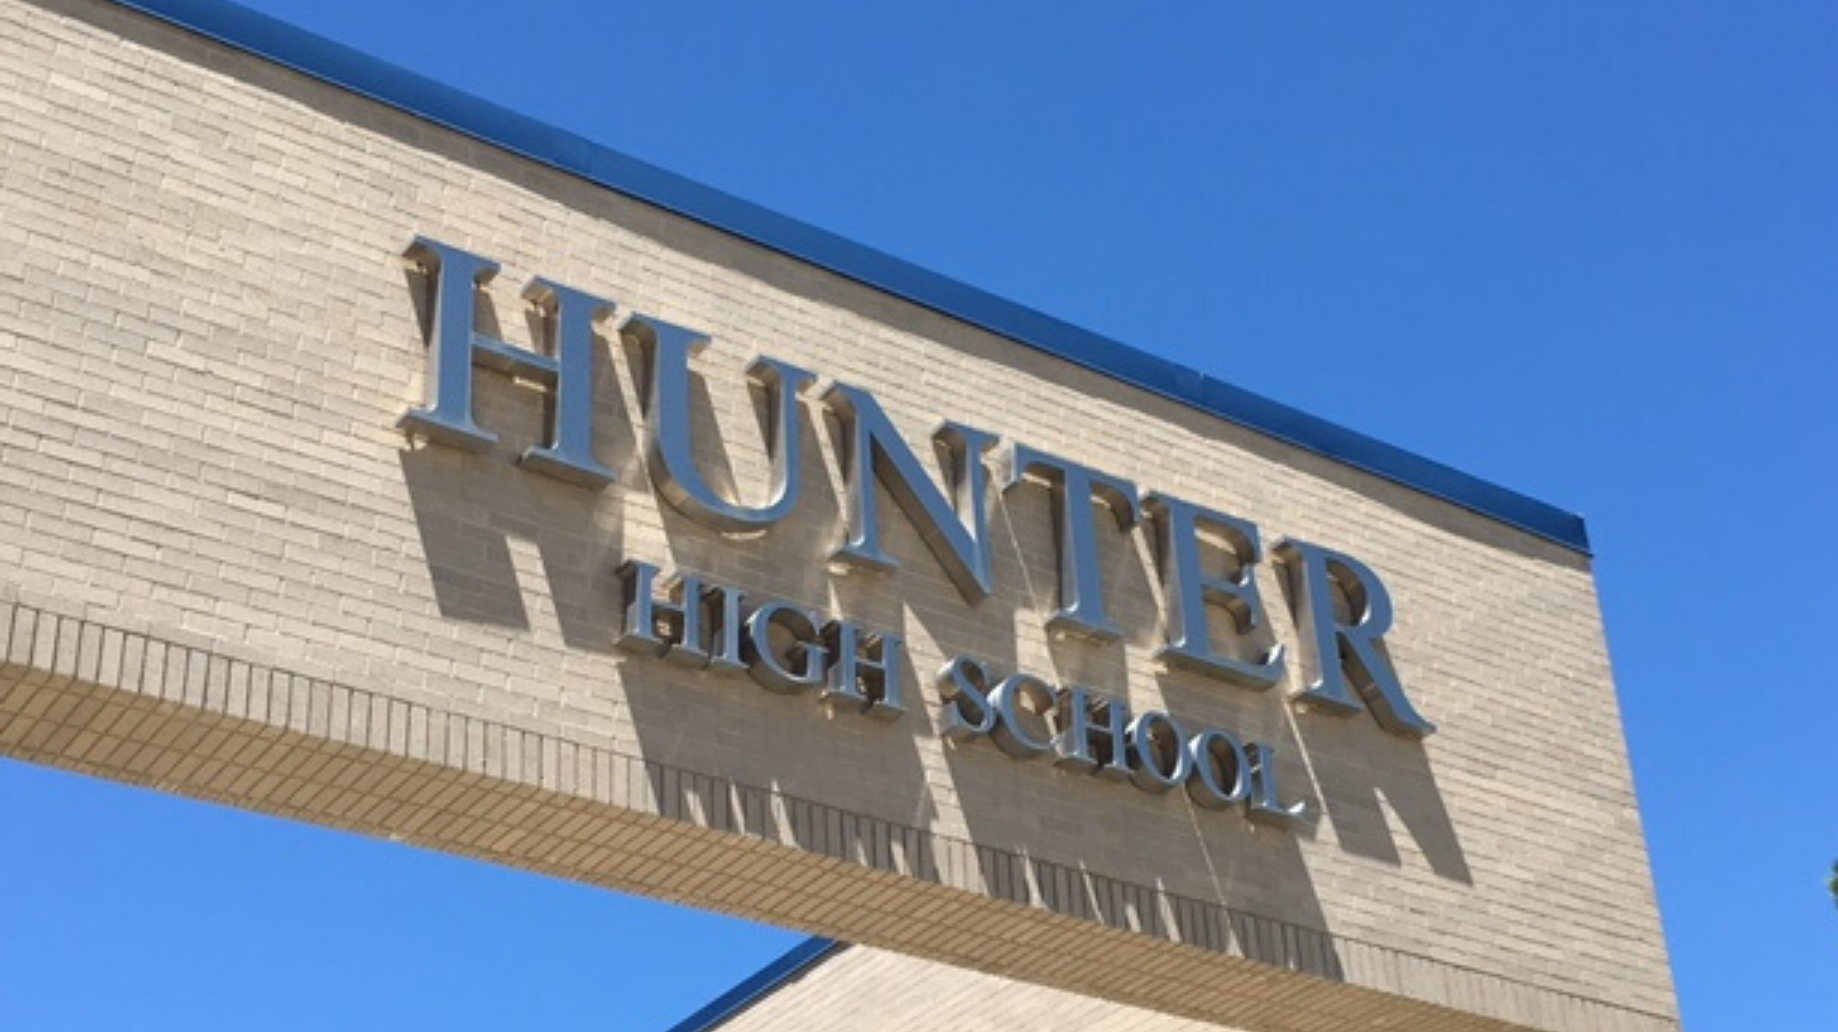 Image of Hunter High School, which went into lockout protocol on Thursday due to suspicious activit...